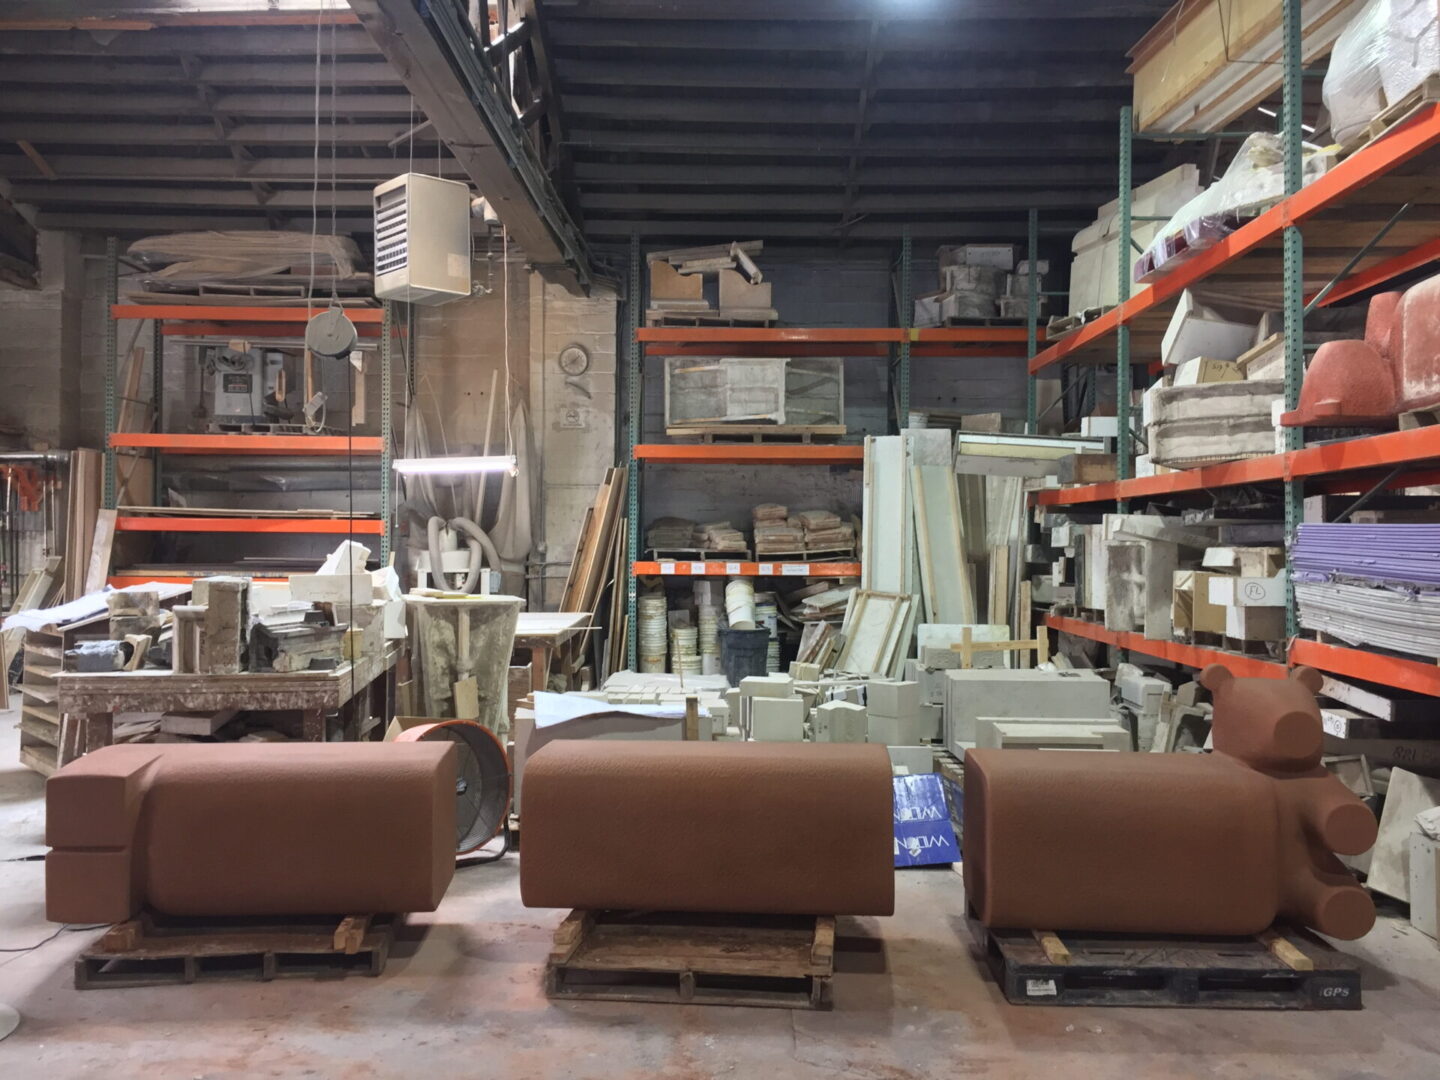 A warehouse filled with lots of shelves and some brown couches.